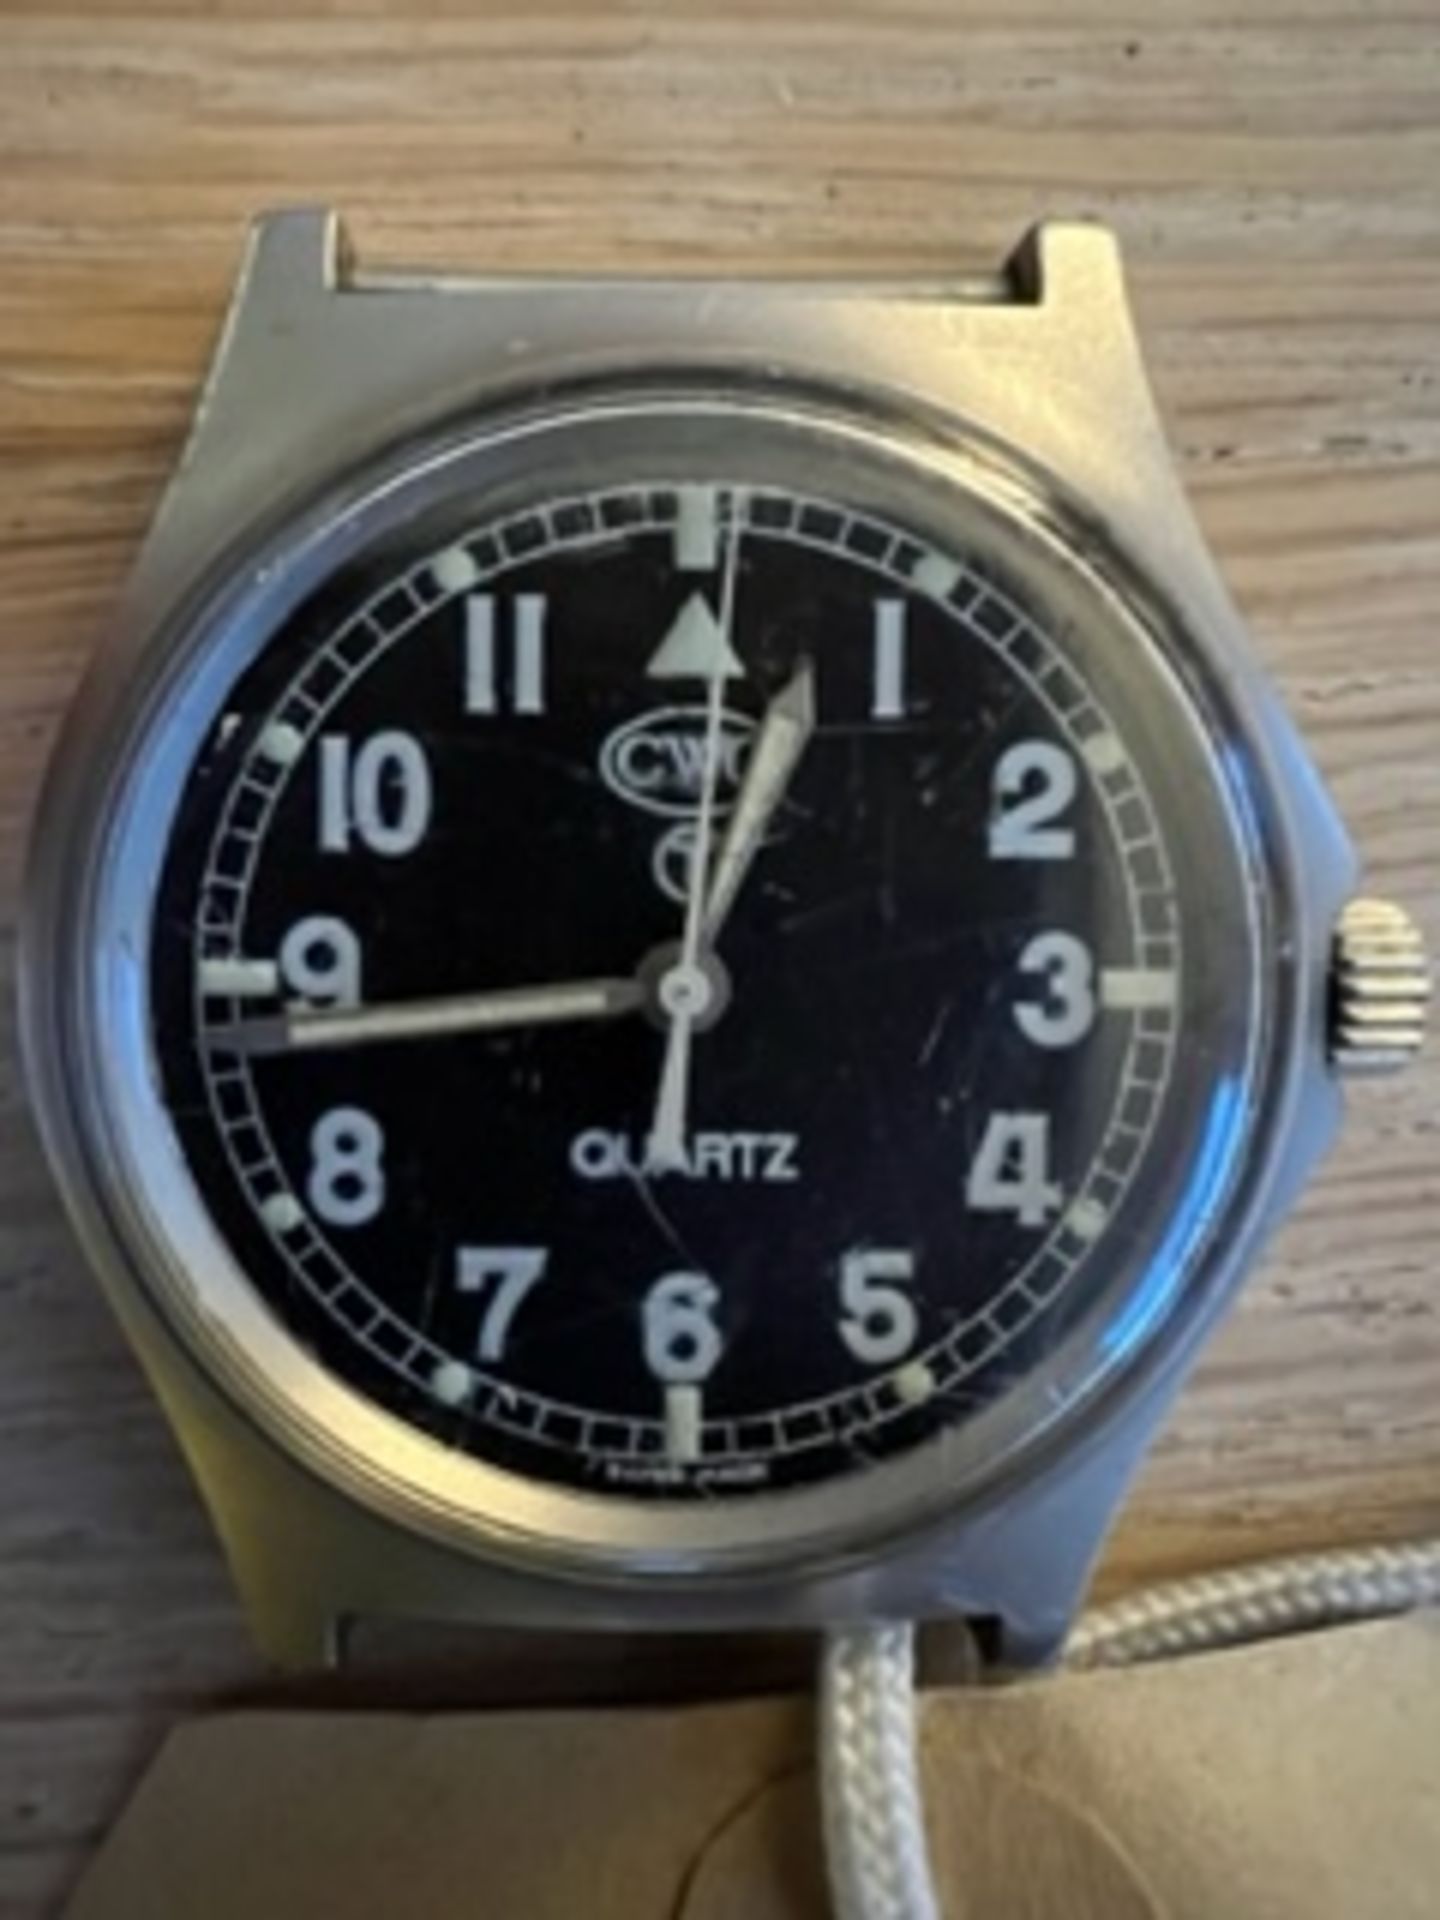 RARE CWC 0552 R. MARINES ISSUE SERVICE WATCH NATO MARKS DATE 1989 NEW BATTERY FITTED - Image 3 of 6